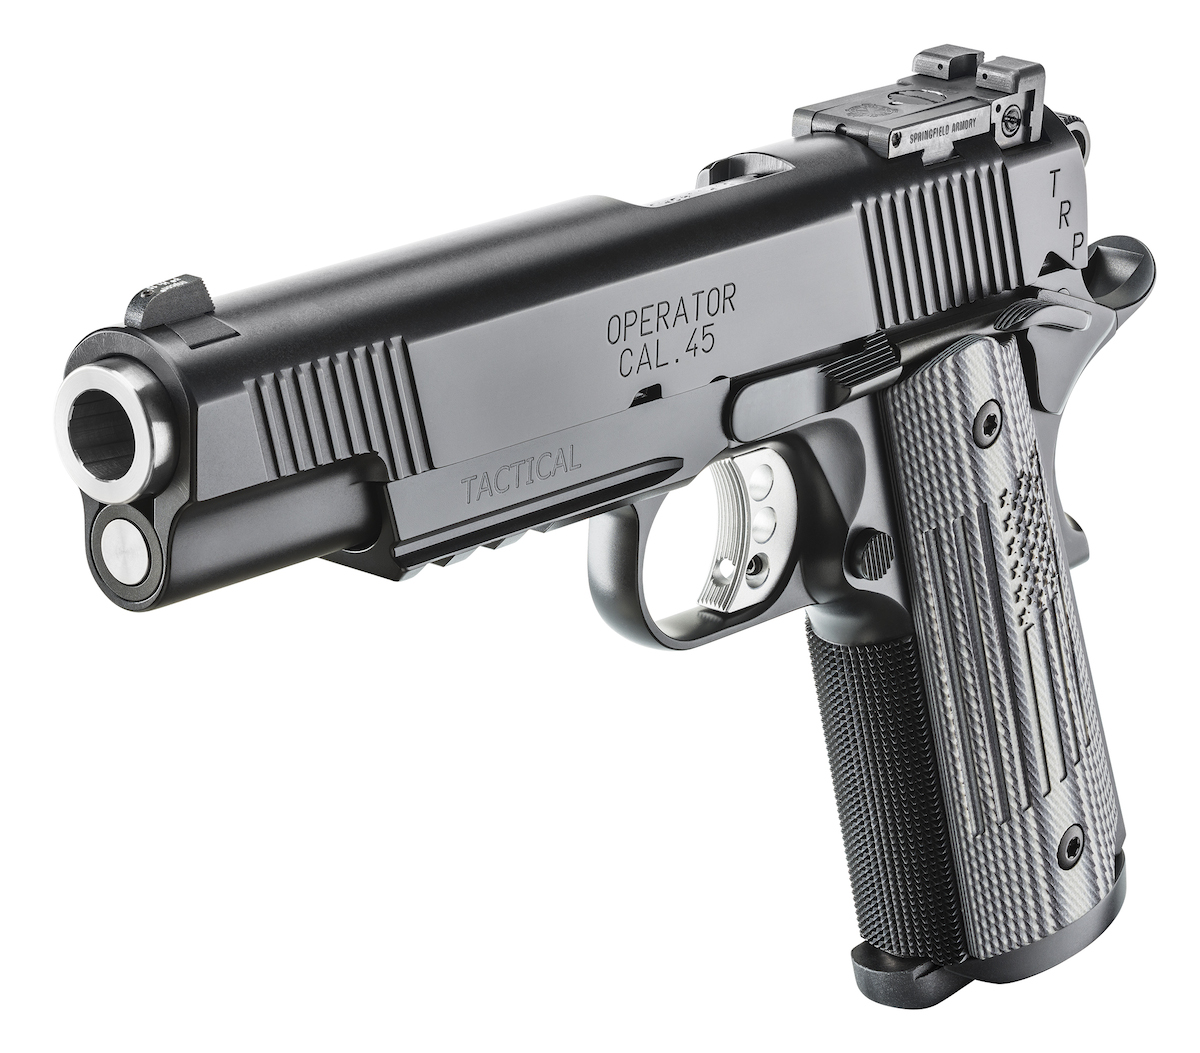 The pistol has all the features you would want (and expect) on a high-end 1911 pistol like this.